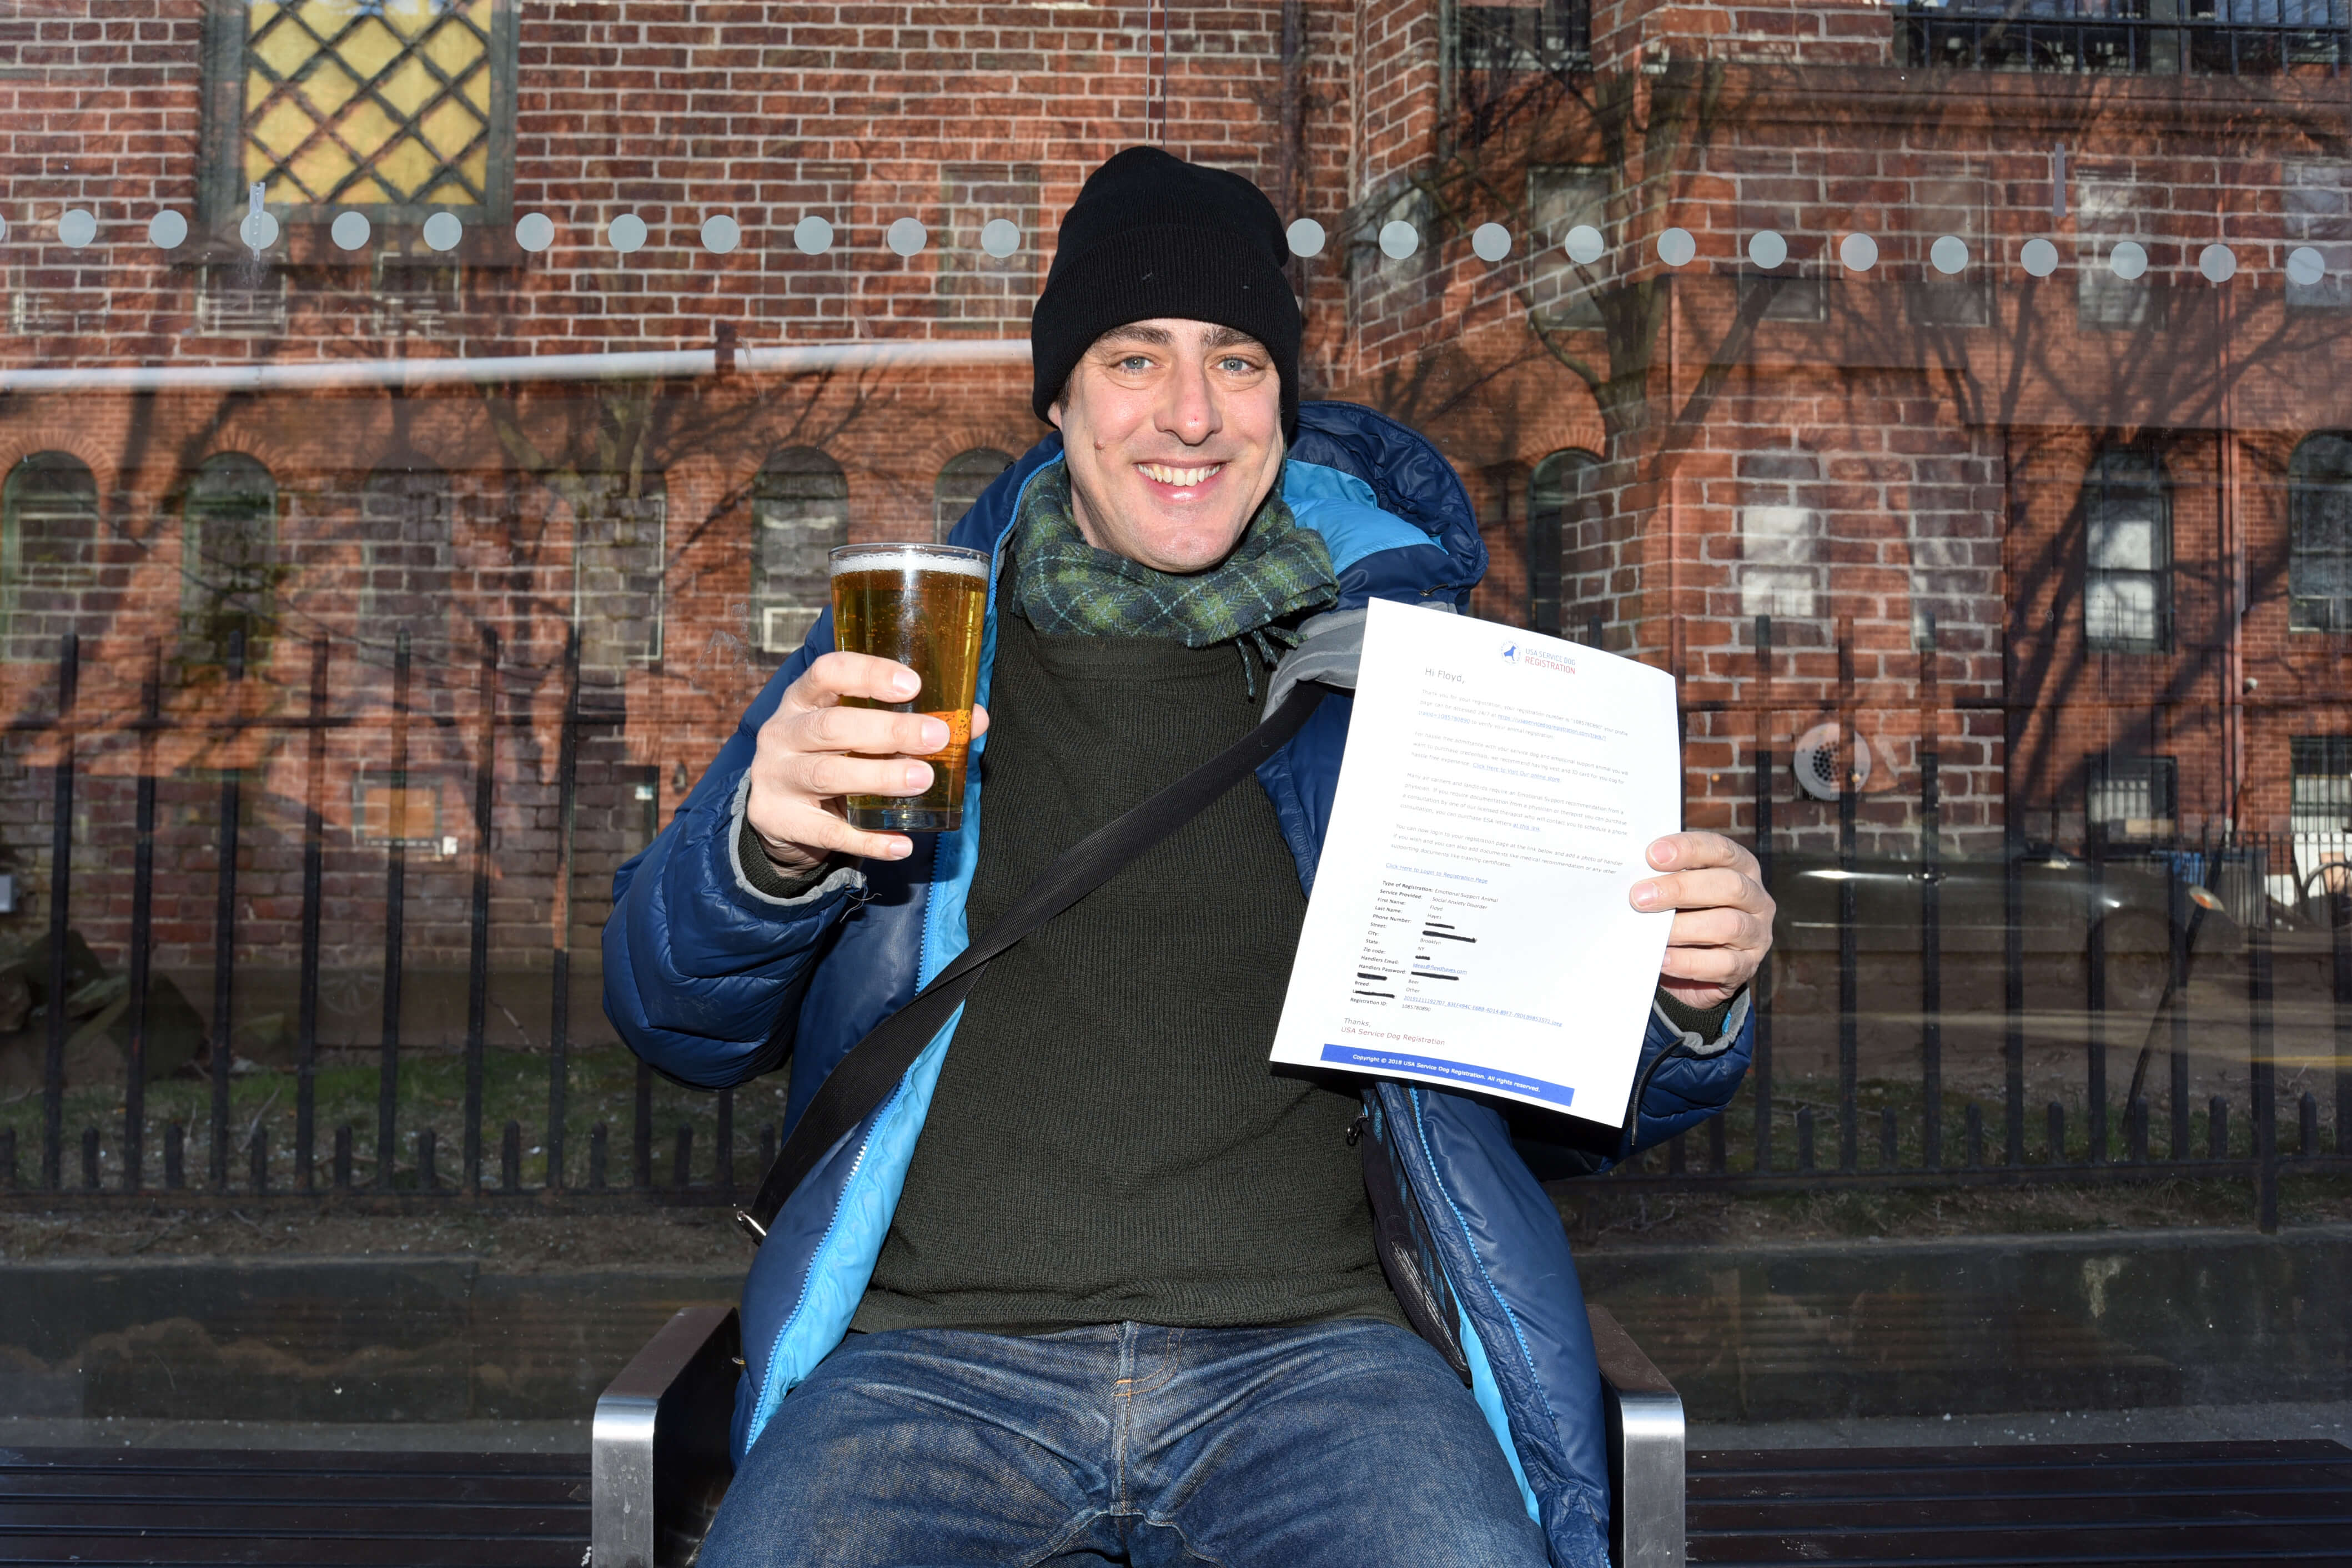 Clinton Hill man registers beer as emotional support animal • Brooklyn Paper